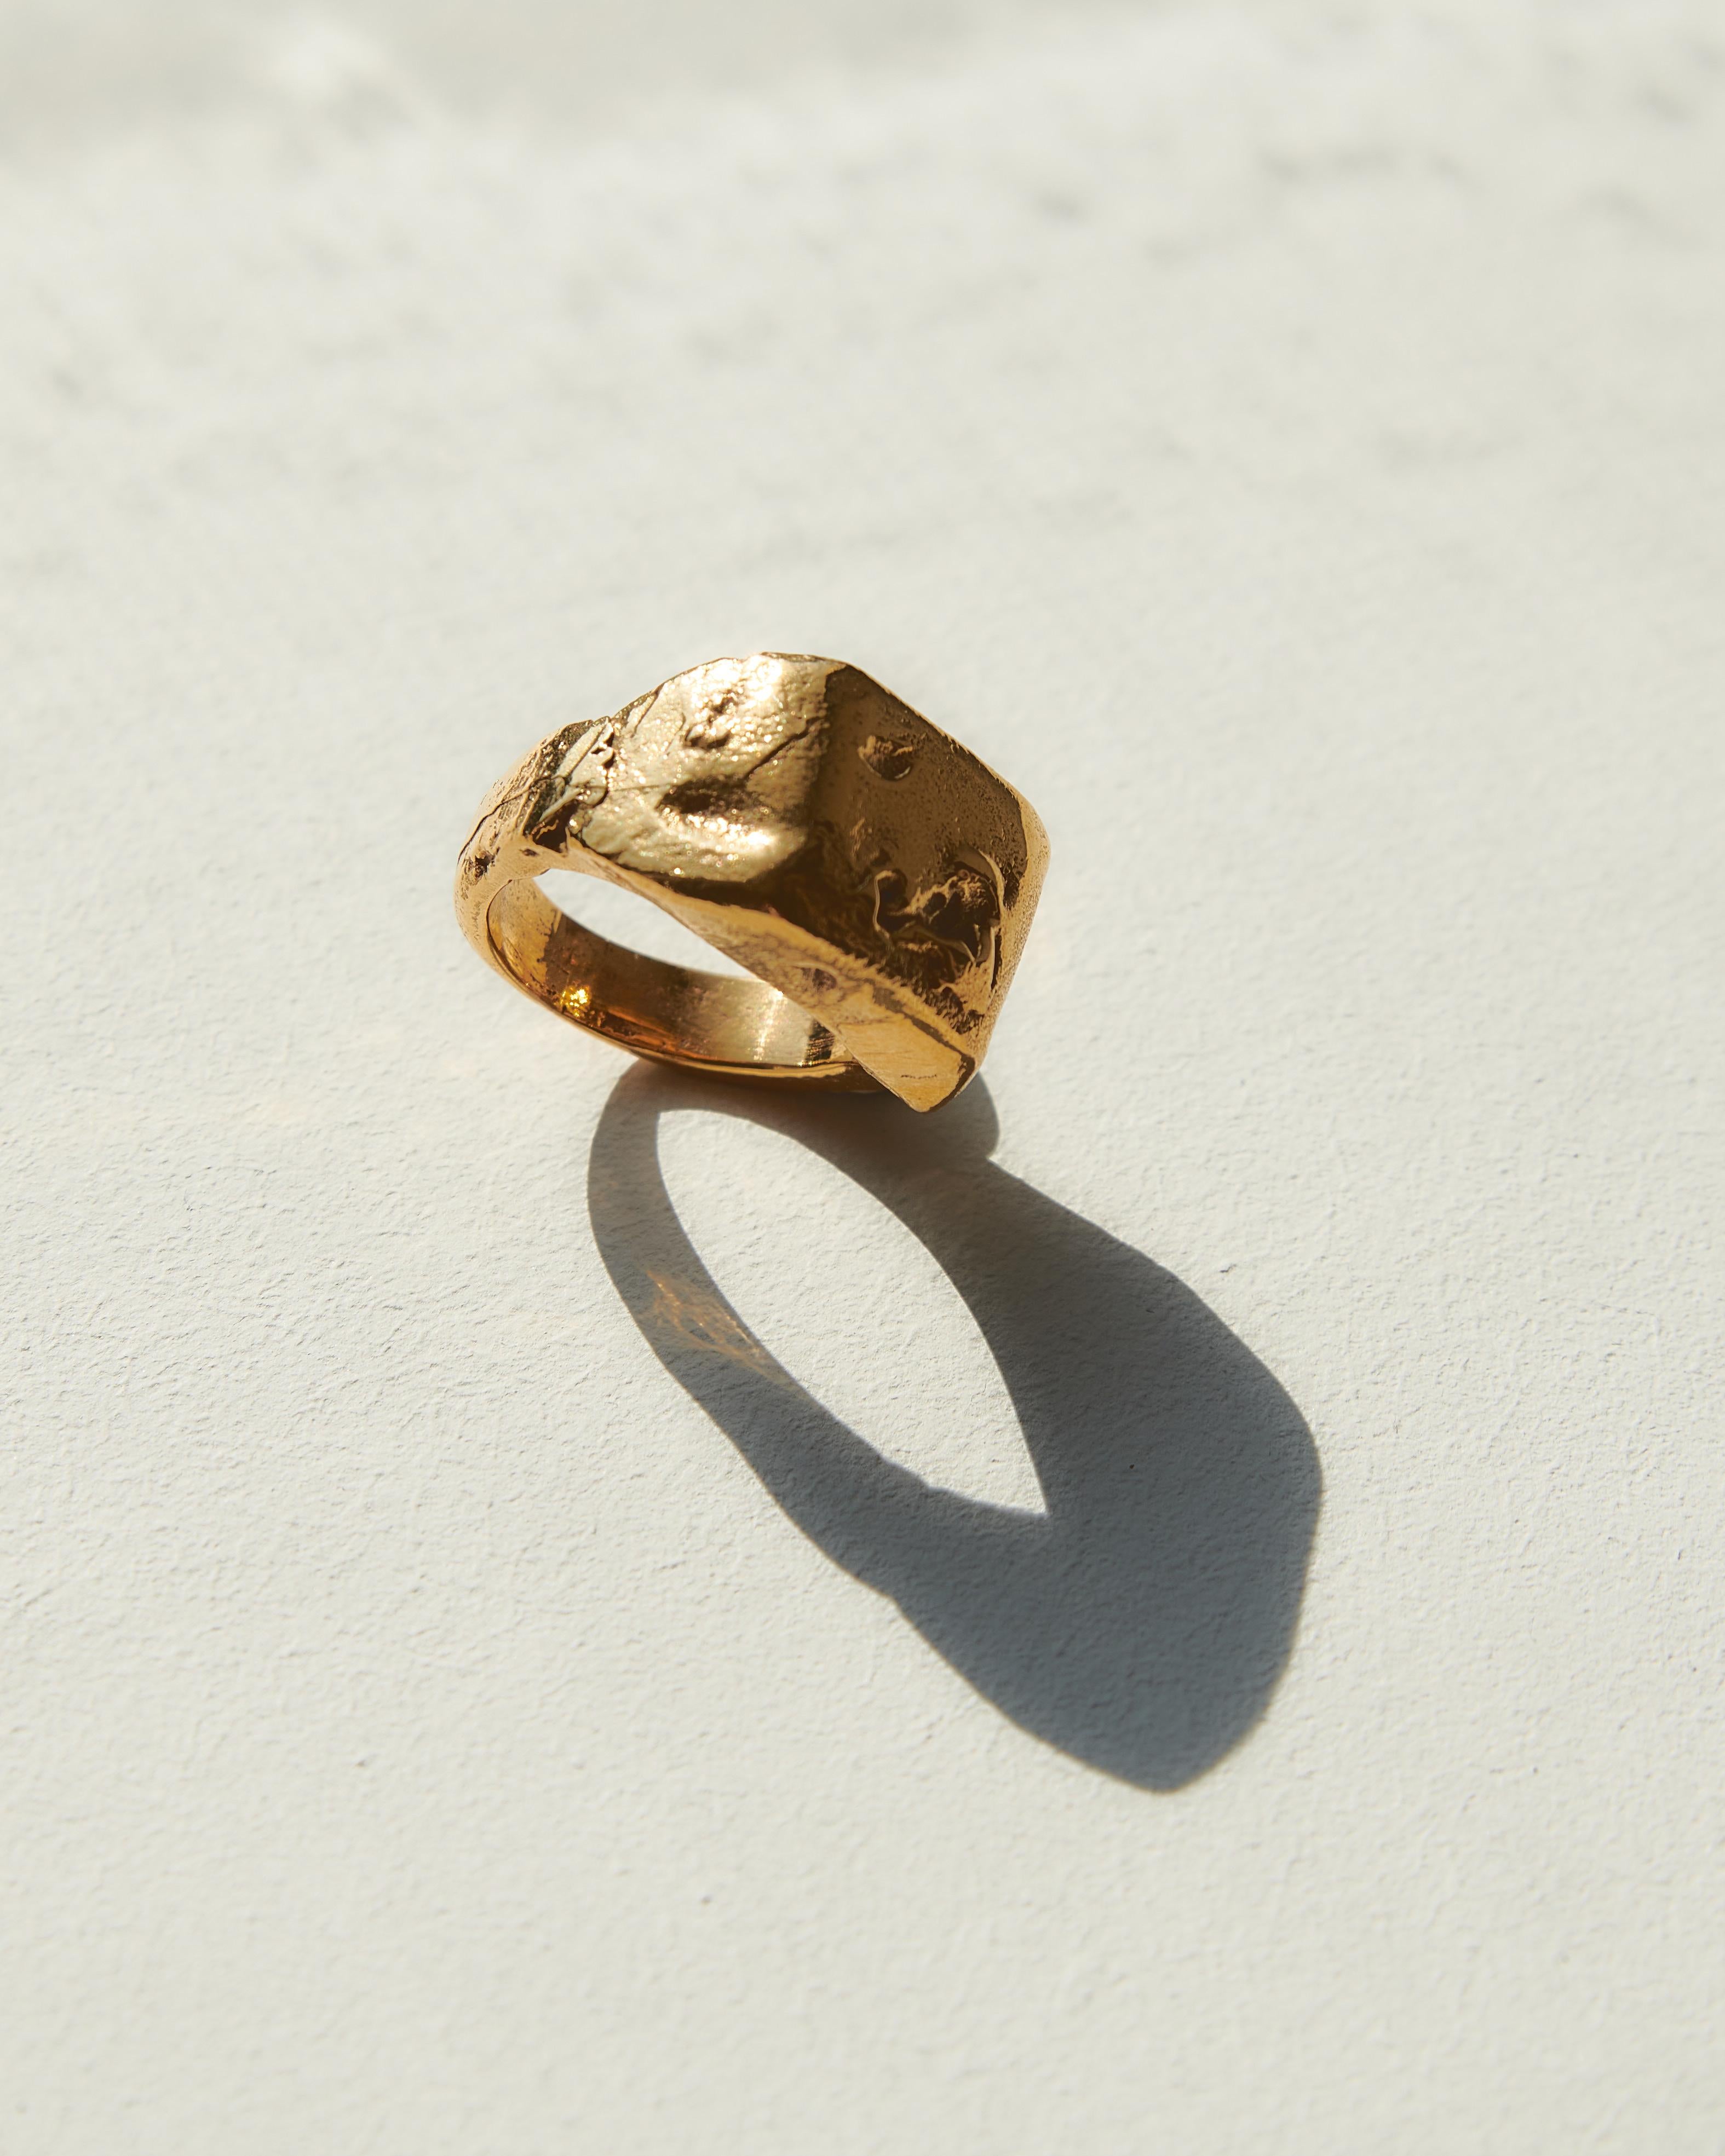 Roman Signet Ring is handmade of 24ct gold-plated bronze.

A signet ring is a small seal, carved into and worn as a ring. Often signet rings contain the owner’s initials, or a symbol unique to the individual. In centuries past, they were worn as a